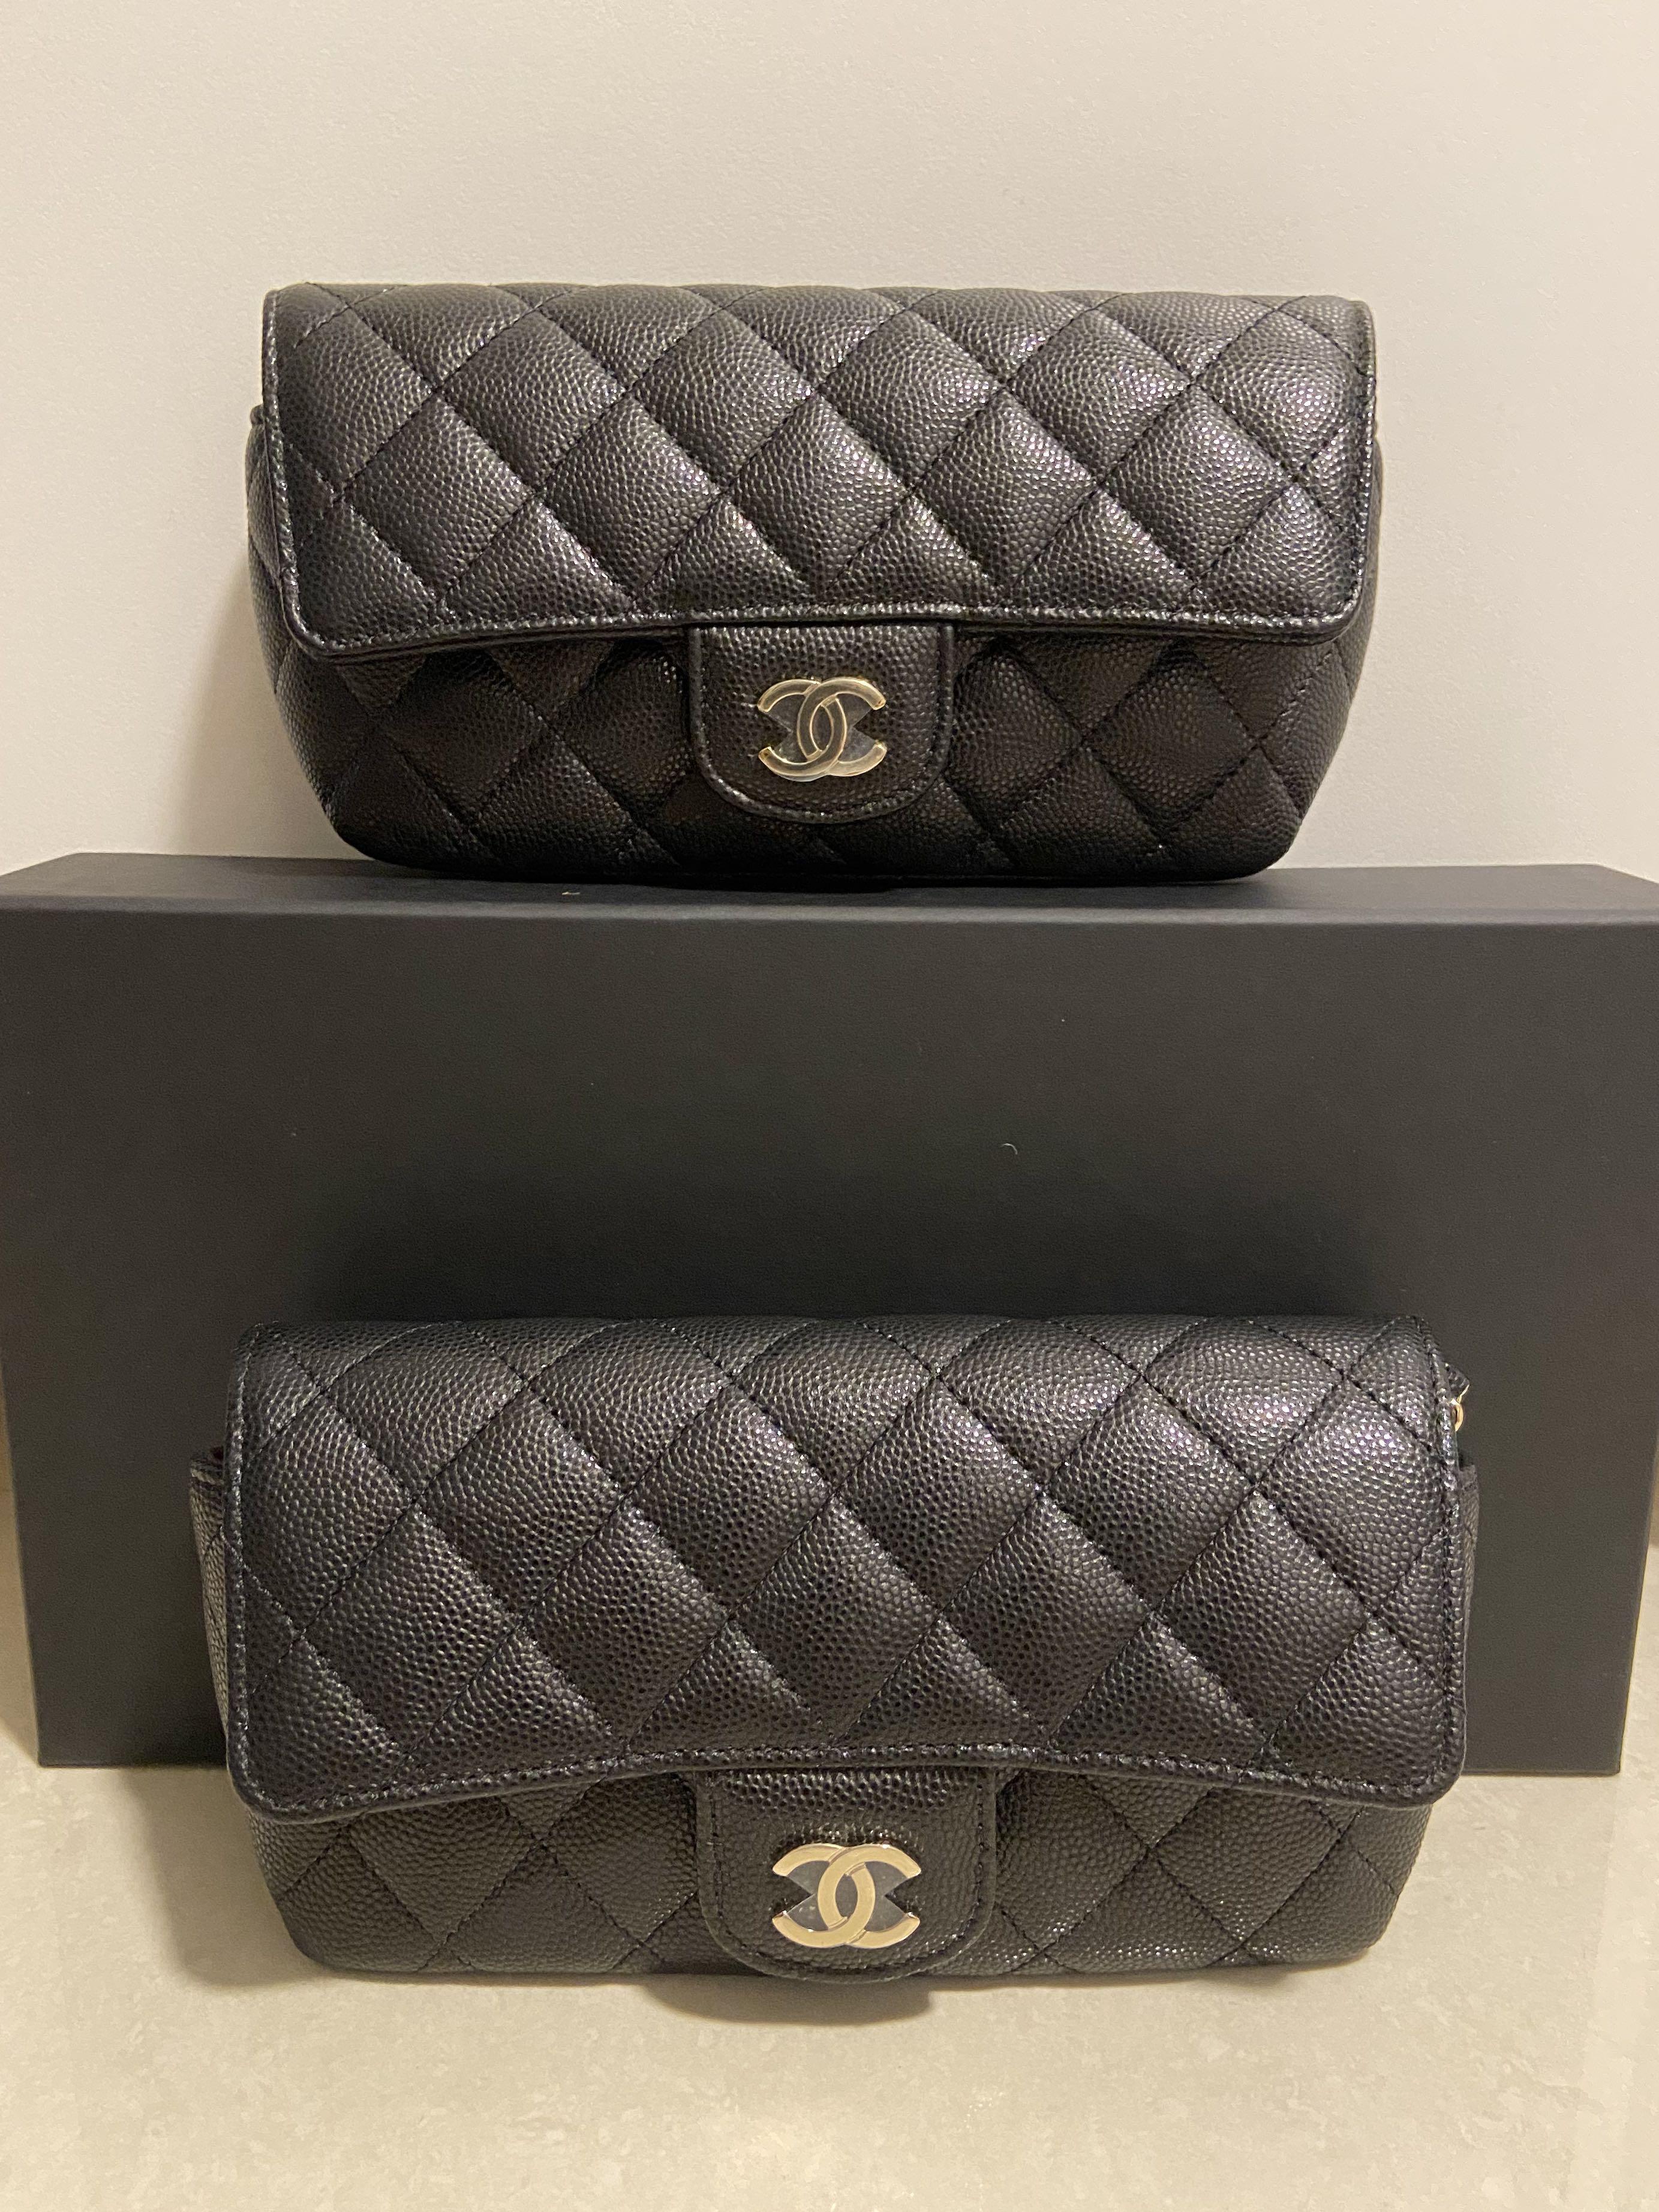 Chanel 21P PHONE HOLDER Black Caviar Leather Unboxing and Initial